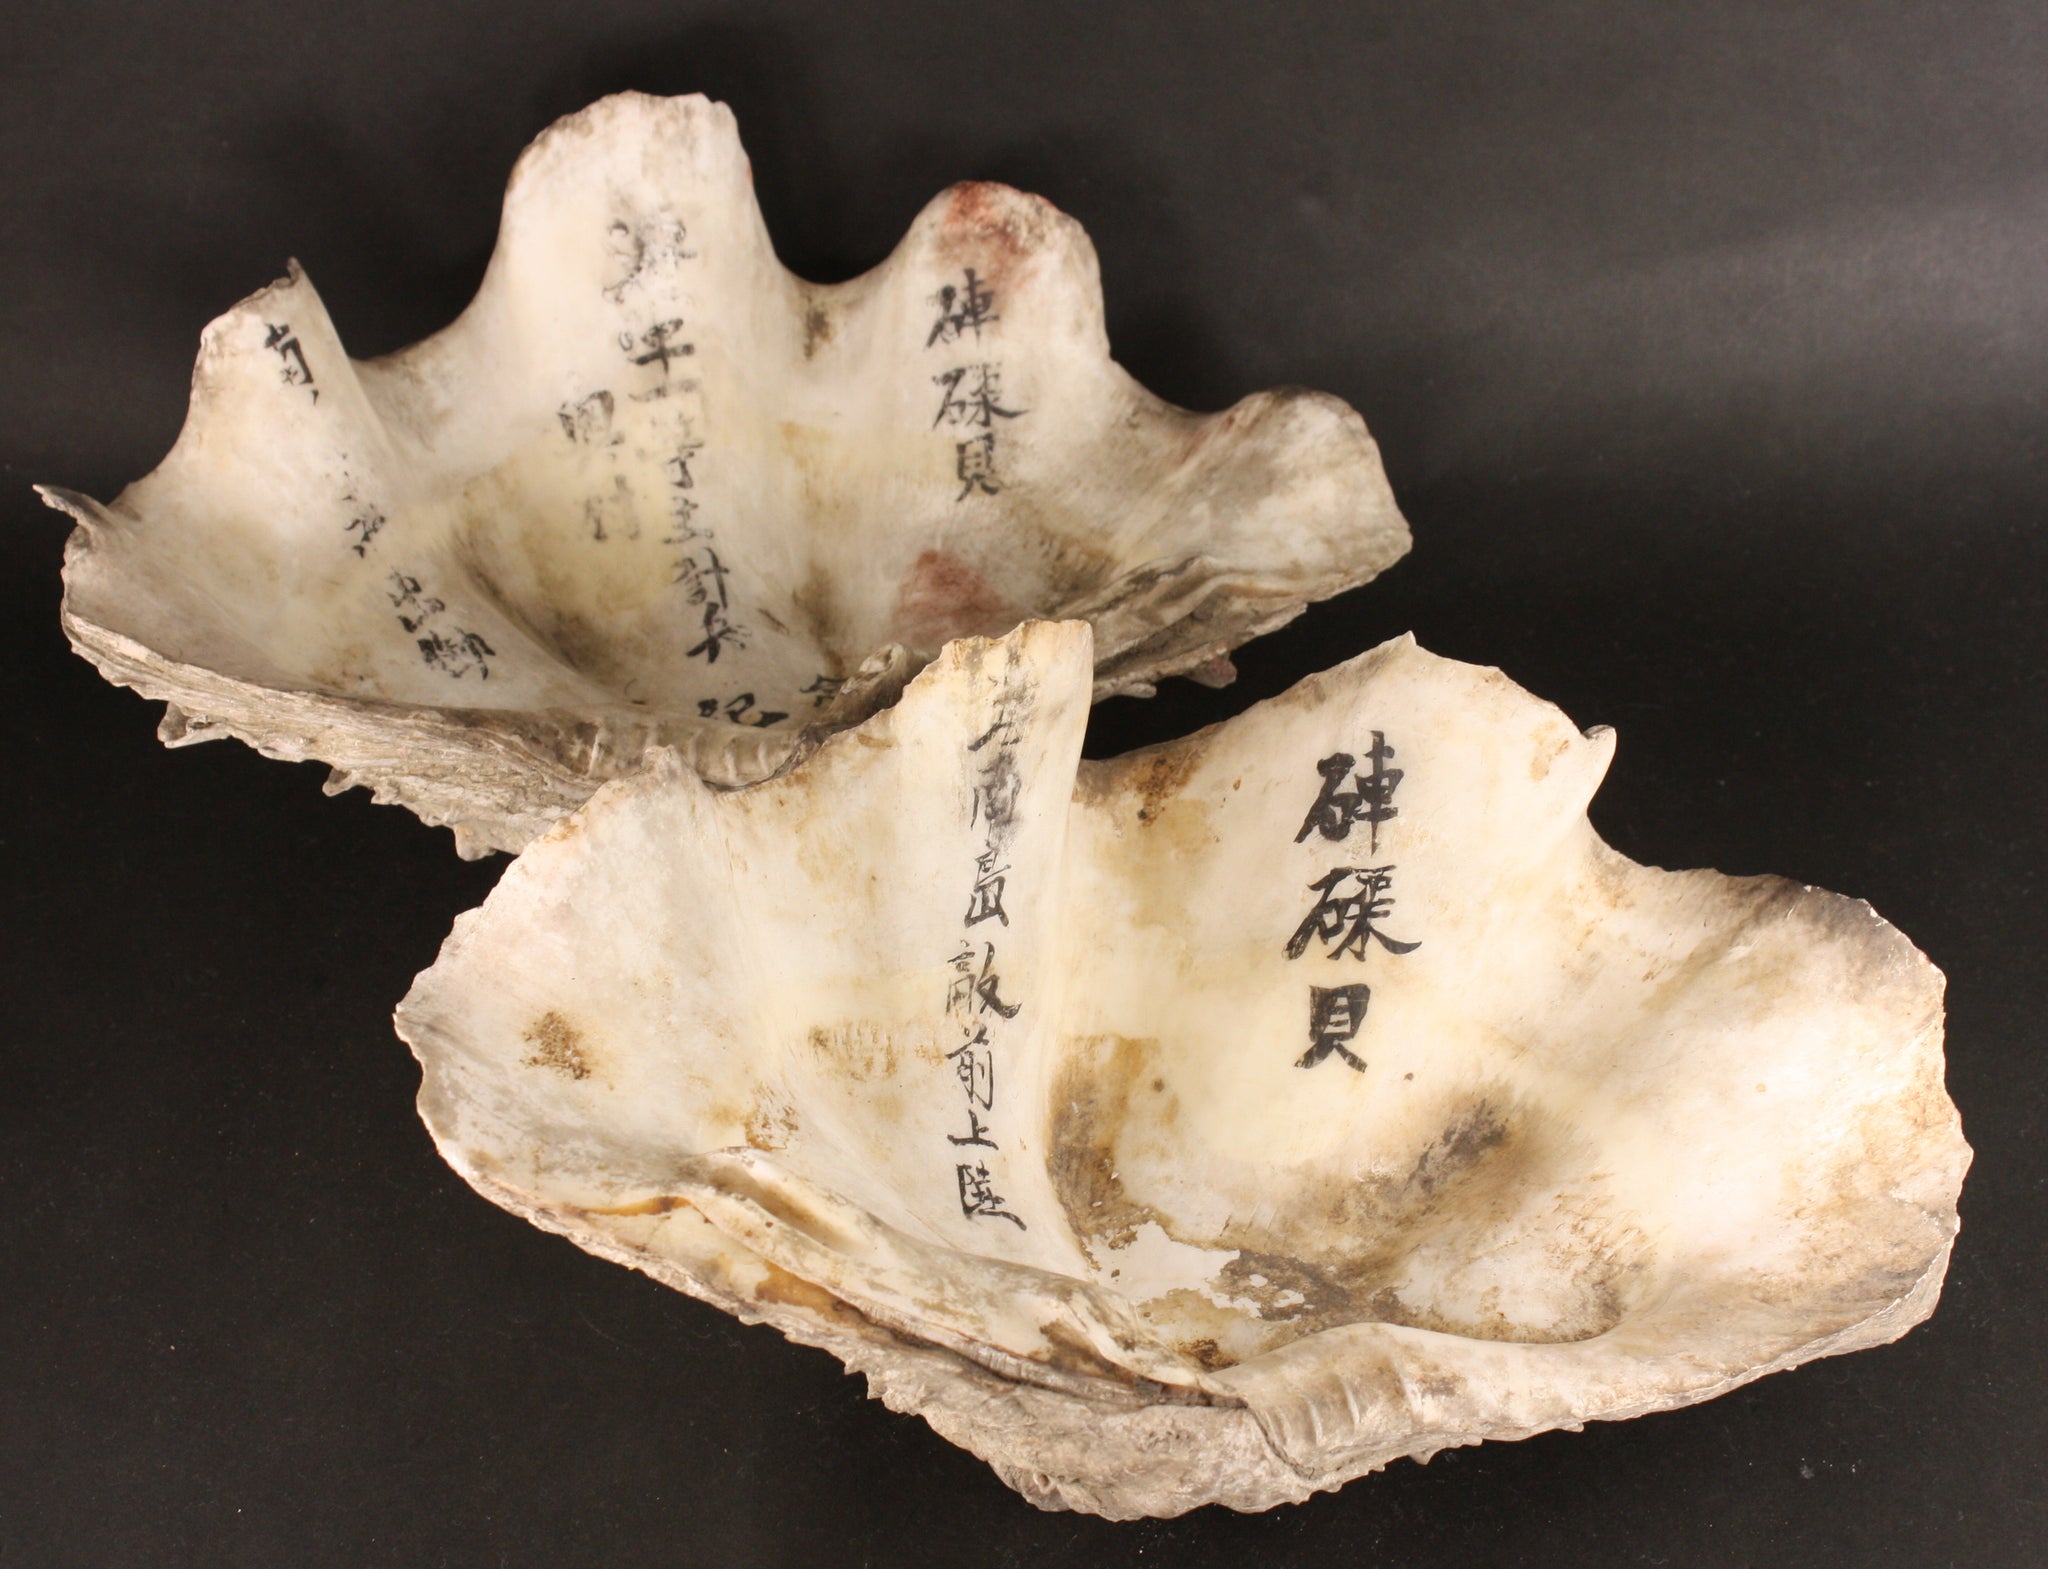 Highly Unusual Antique Japanese SNLF Hainan Island Campaign Landing Commemoration Shells